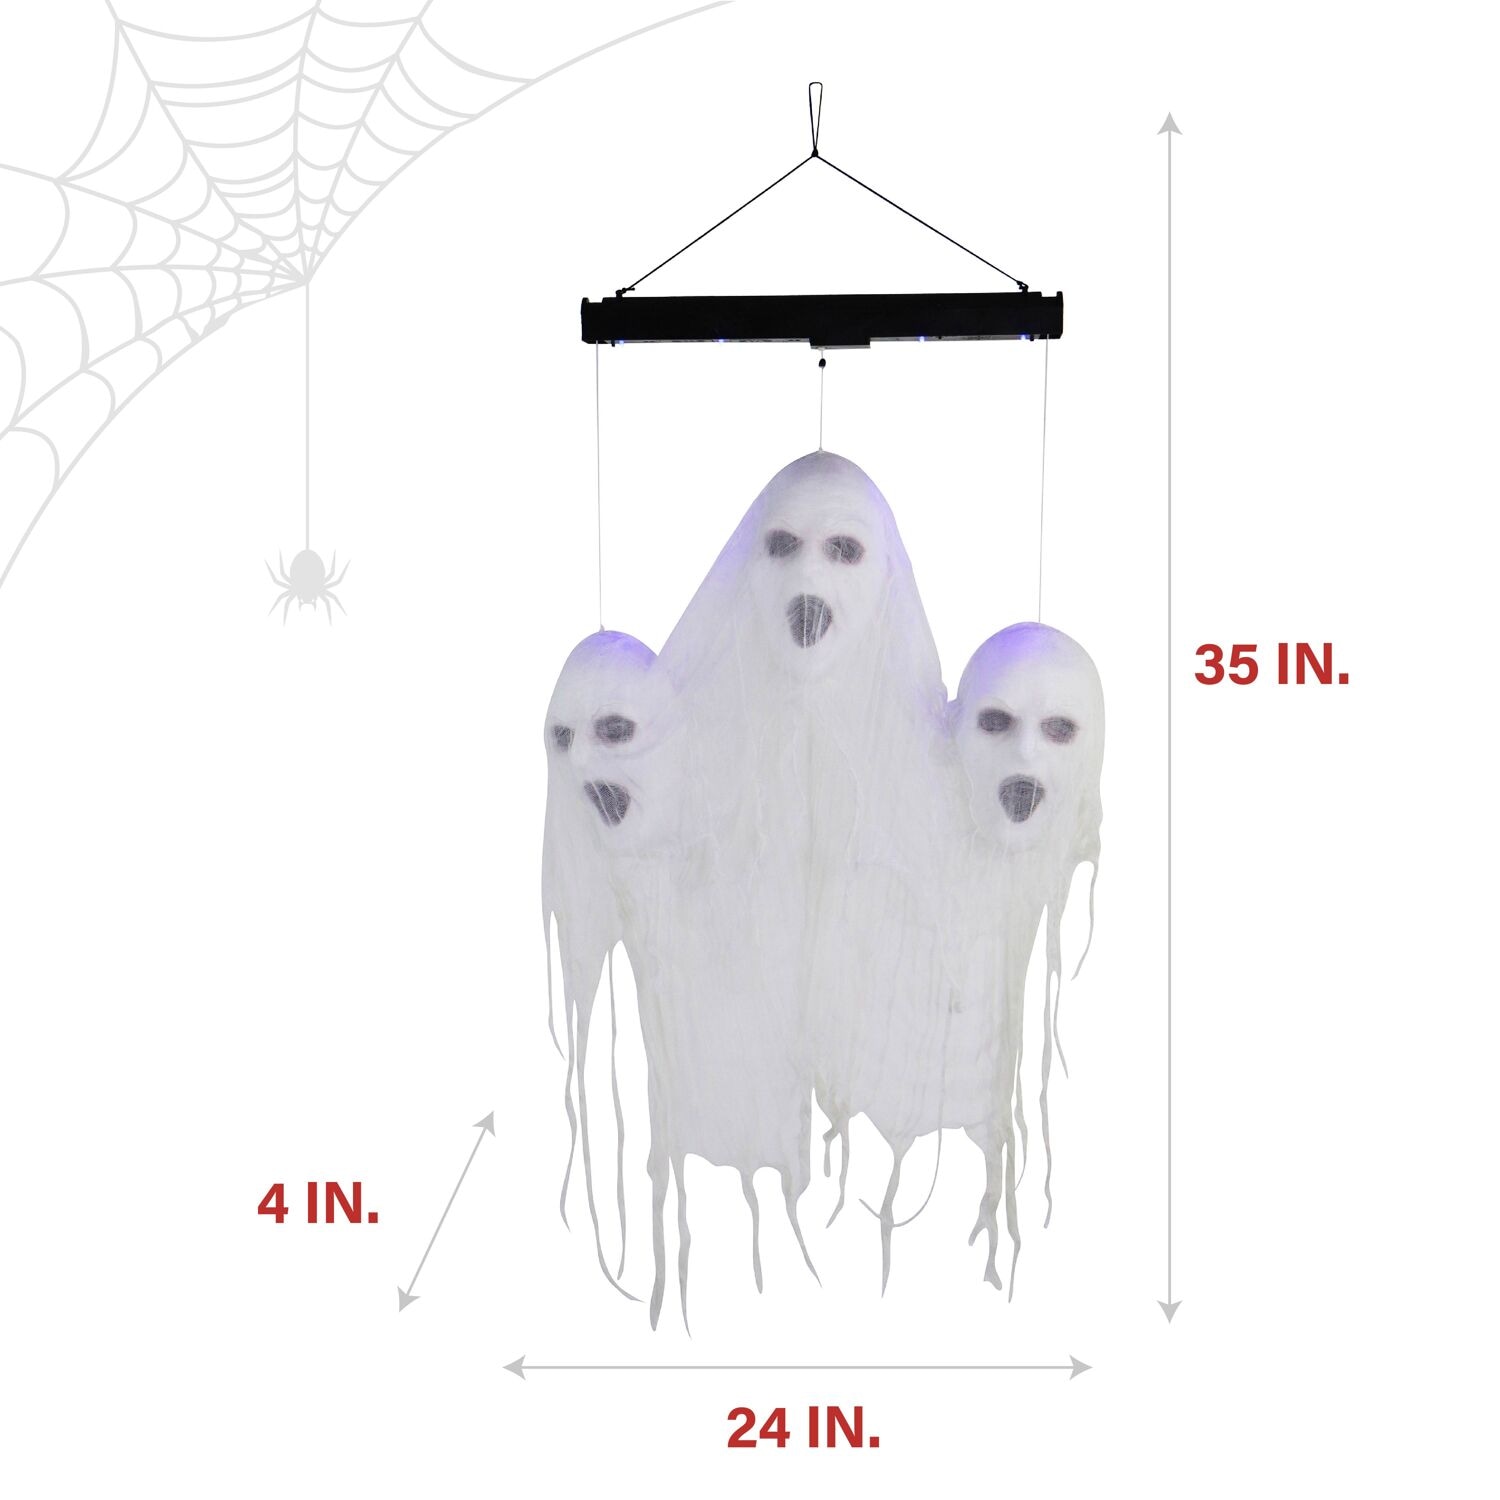 Hanging Ghost Halloween Decorations Novelty Electric Scary